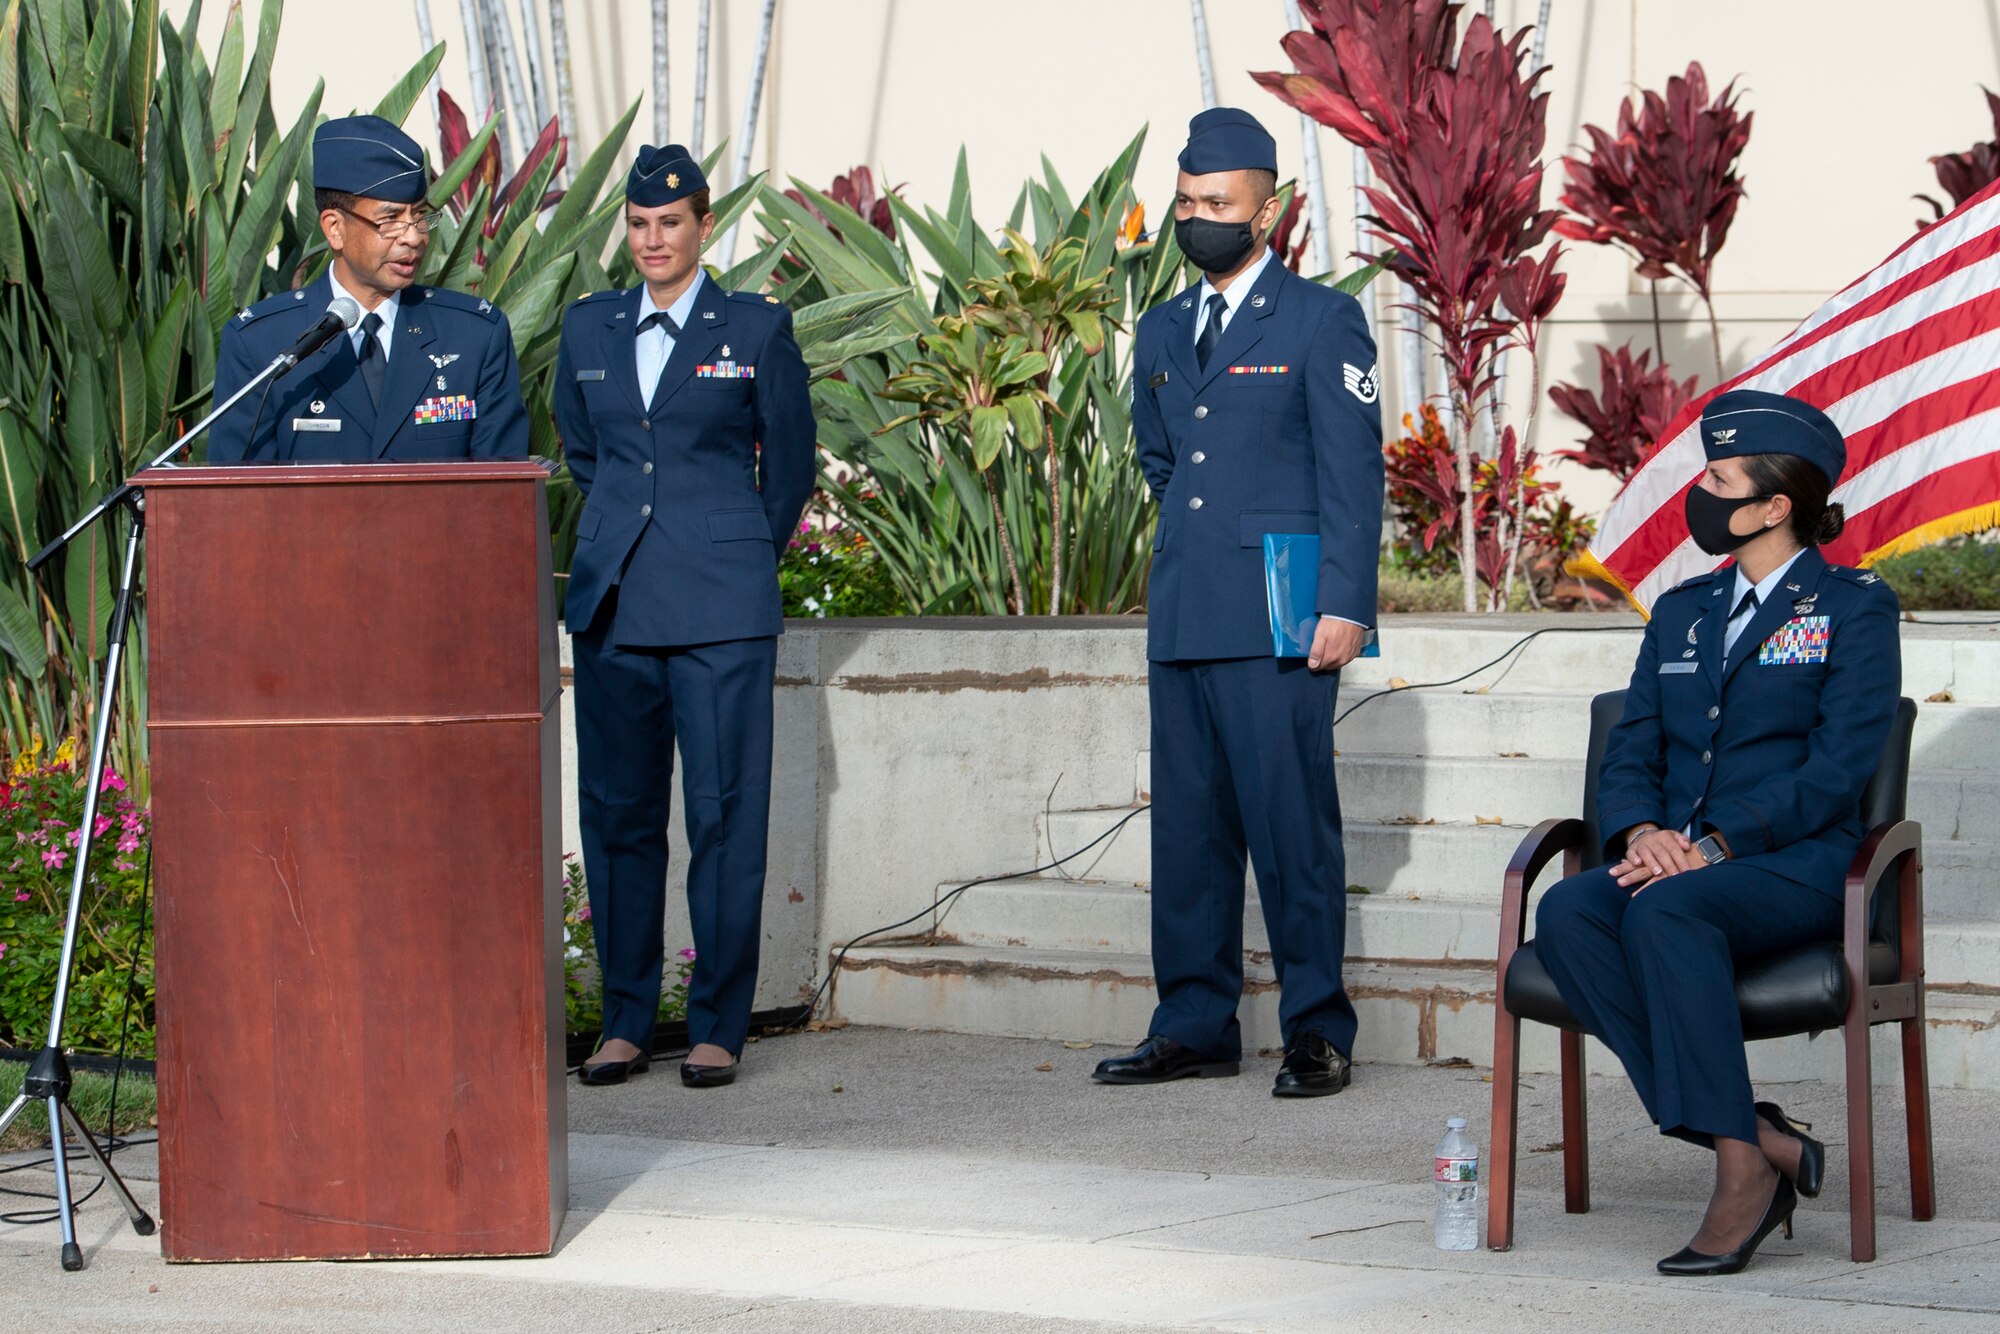 Photo of U.S. Air Force Col. Edward Johnson, 624th Aeromedical Staging Squadron incoming commander, speaking to audience members during the 624th ASTS change of command ceremony in front of the 15th Medical Group building at Joint Base Pearl Harbor-Hickam, Hawaii, Aug. 8, 2020.